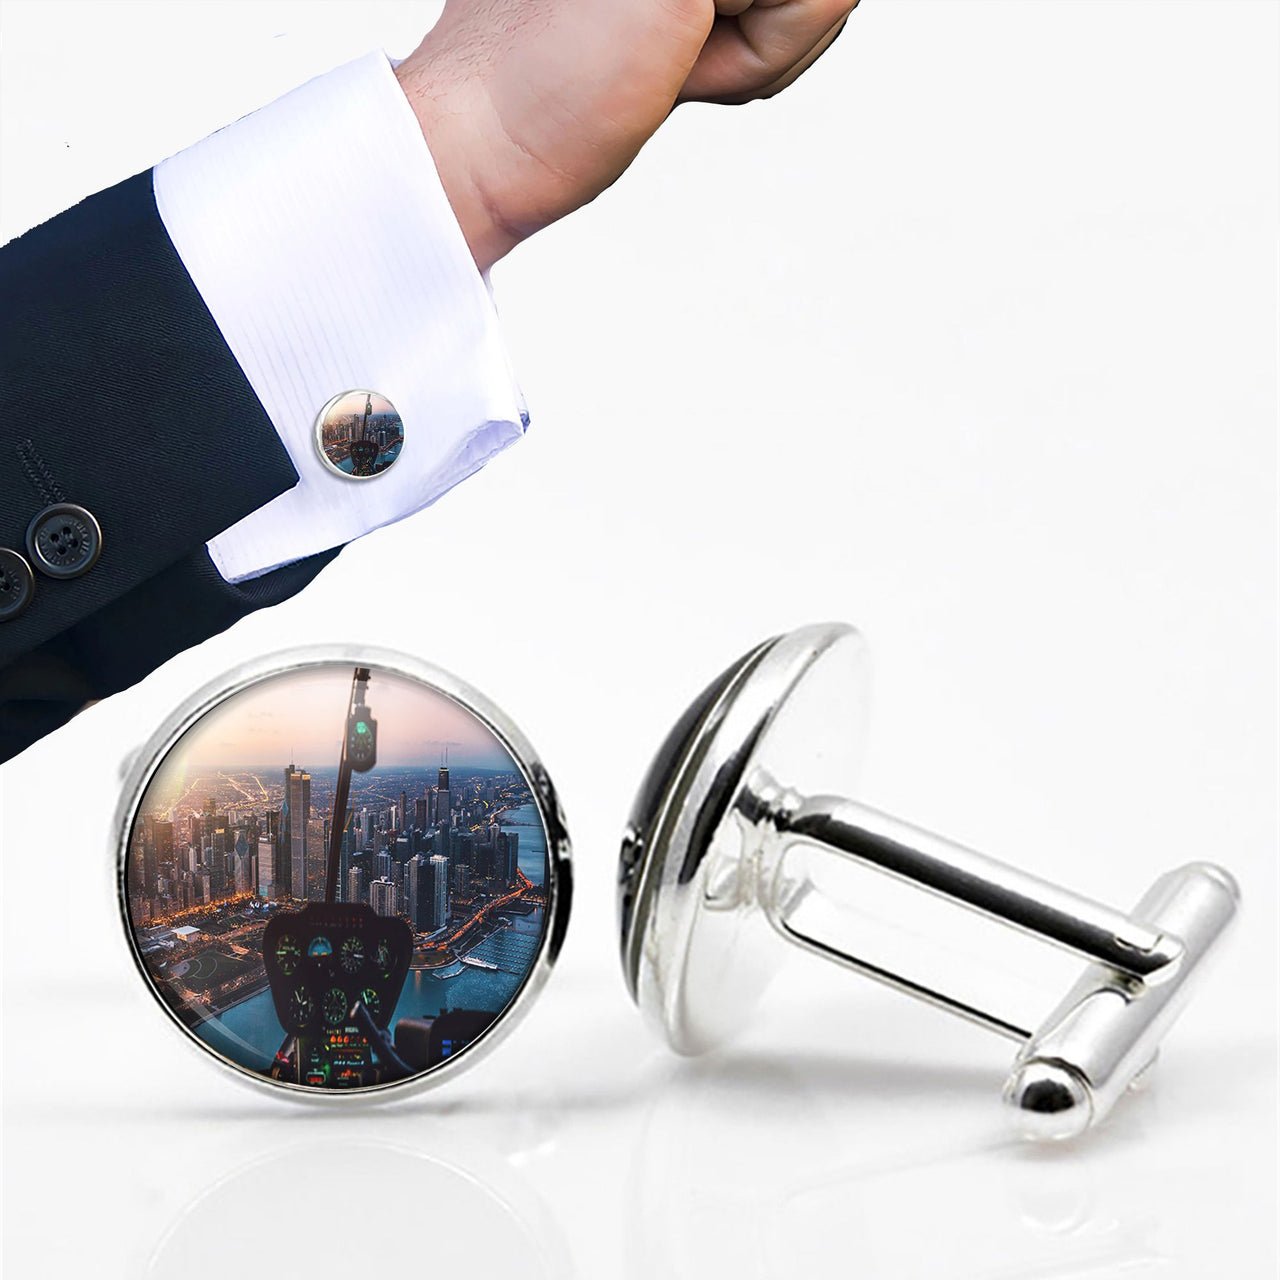 Amazing City View from Helicopter Cockpit Designed Cuff Links